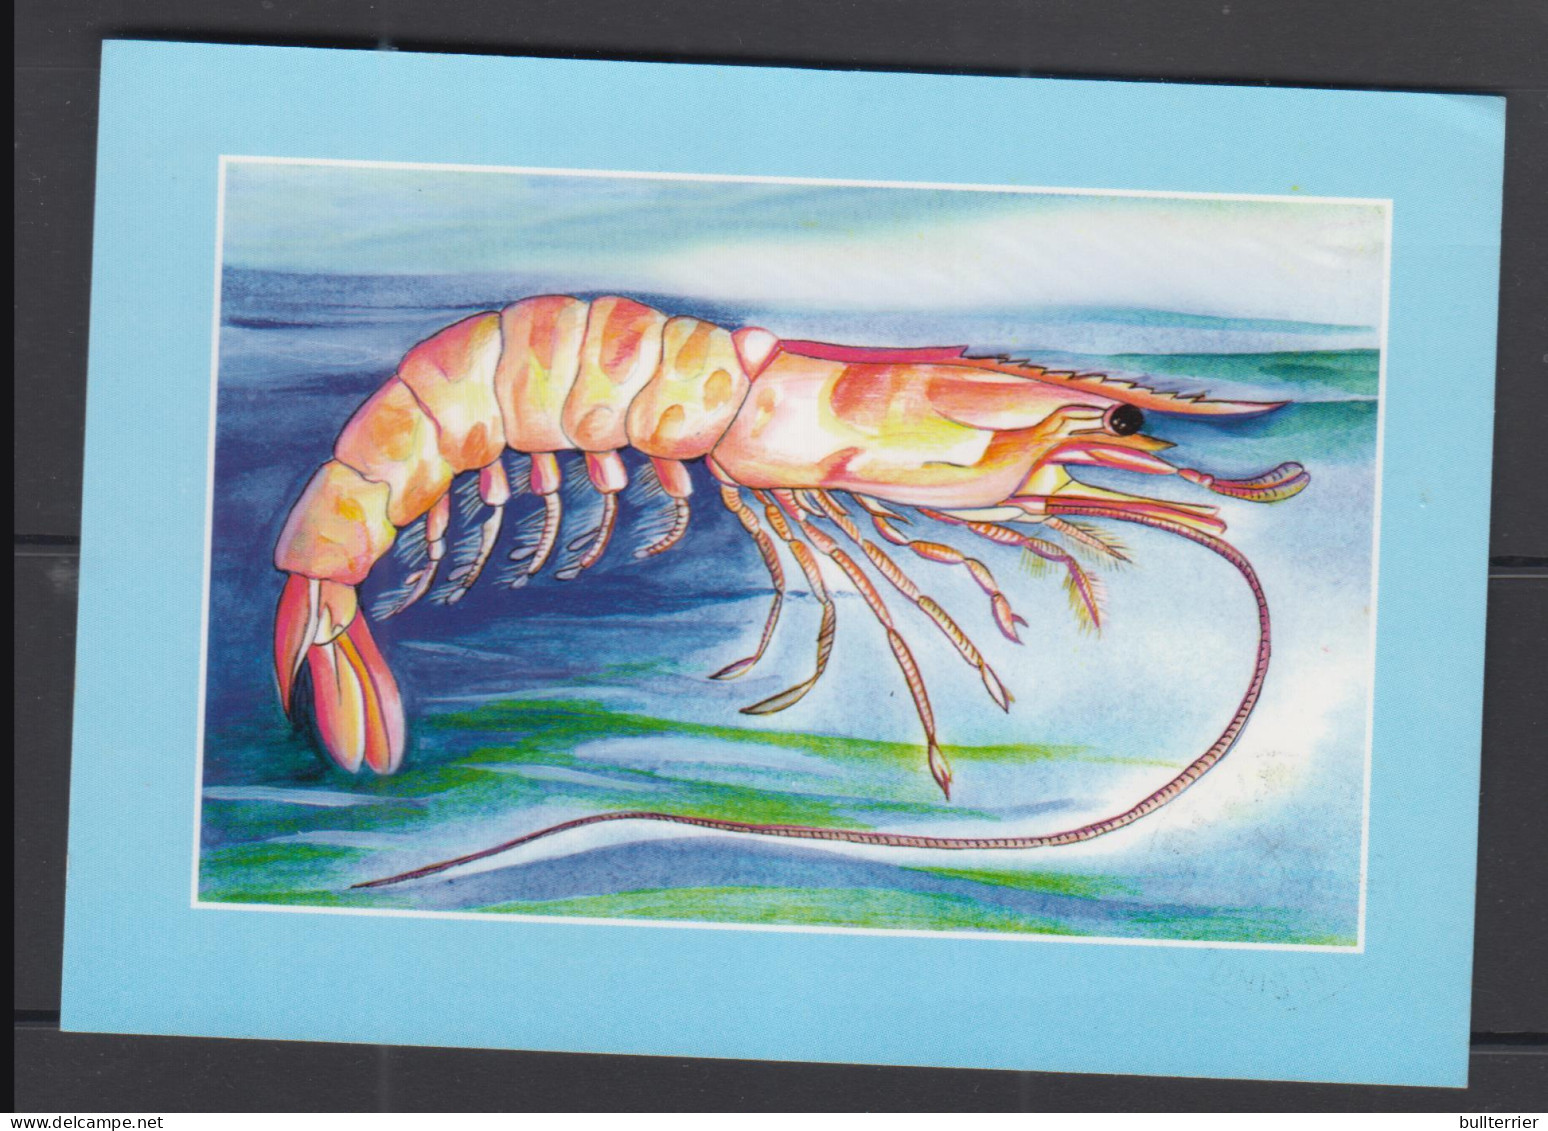 MARINE LIFE - TUNISIA - 1999 - POSTCARD TO  GERMANY WITH CRUSTACEANS SET OF 3 IMPERF - Crustáceos